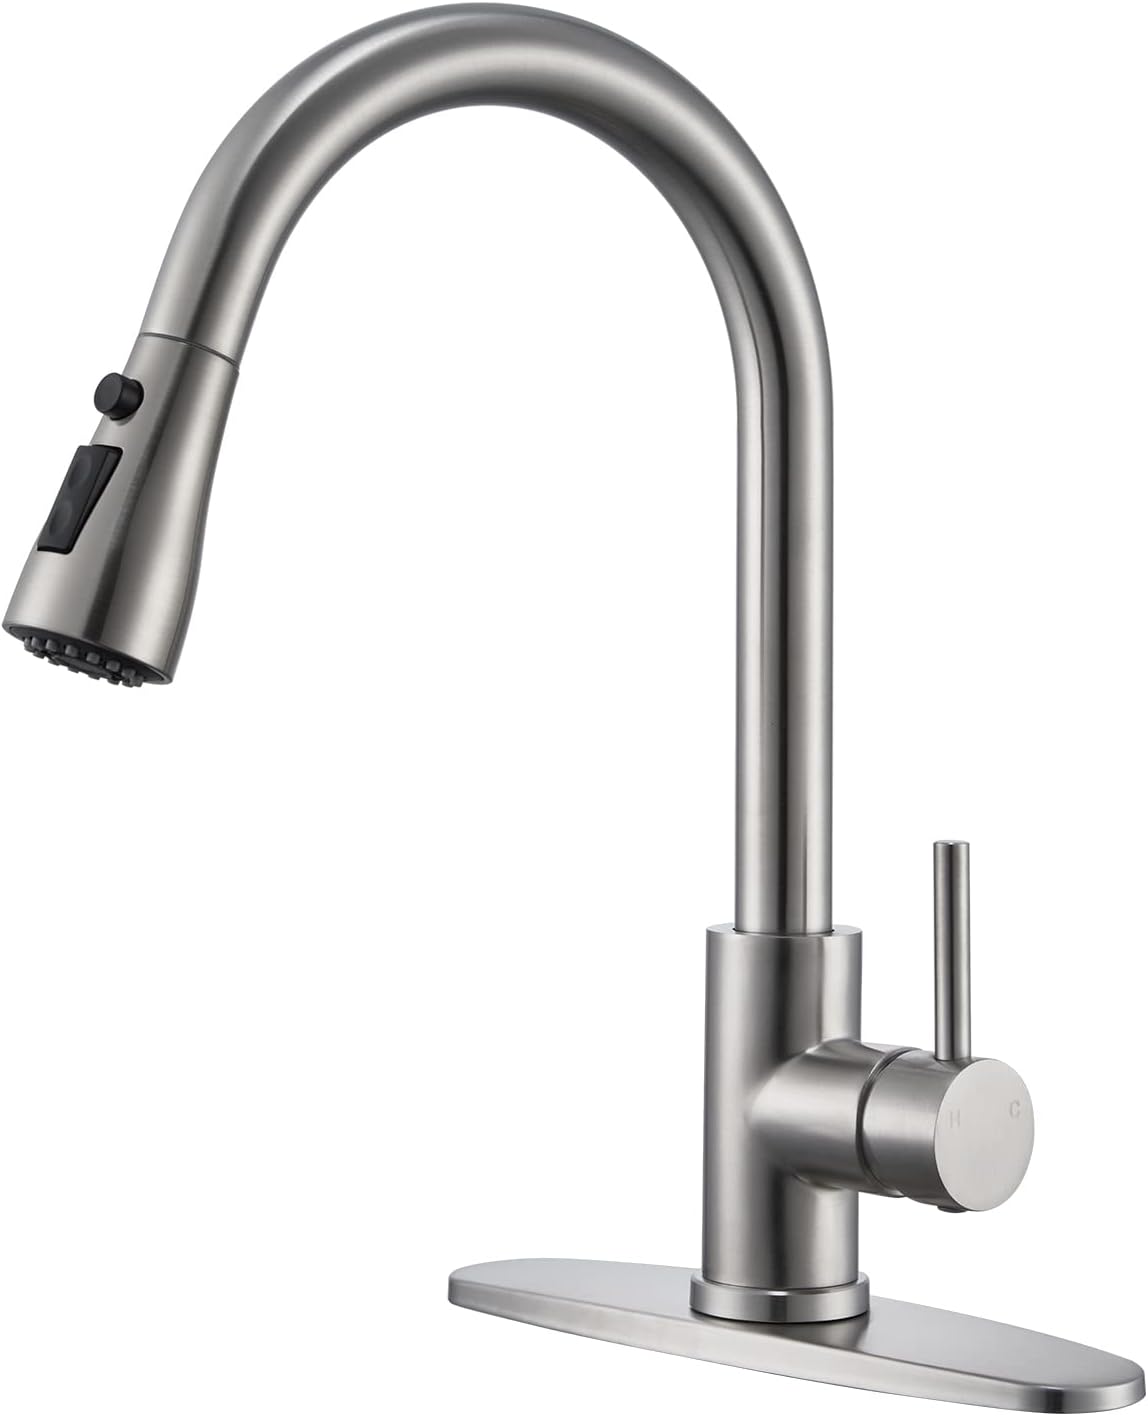 AIODZLFD Brushed Nickel Kitchen Faucets with Pull Down [...]